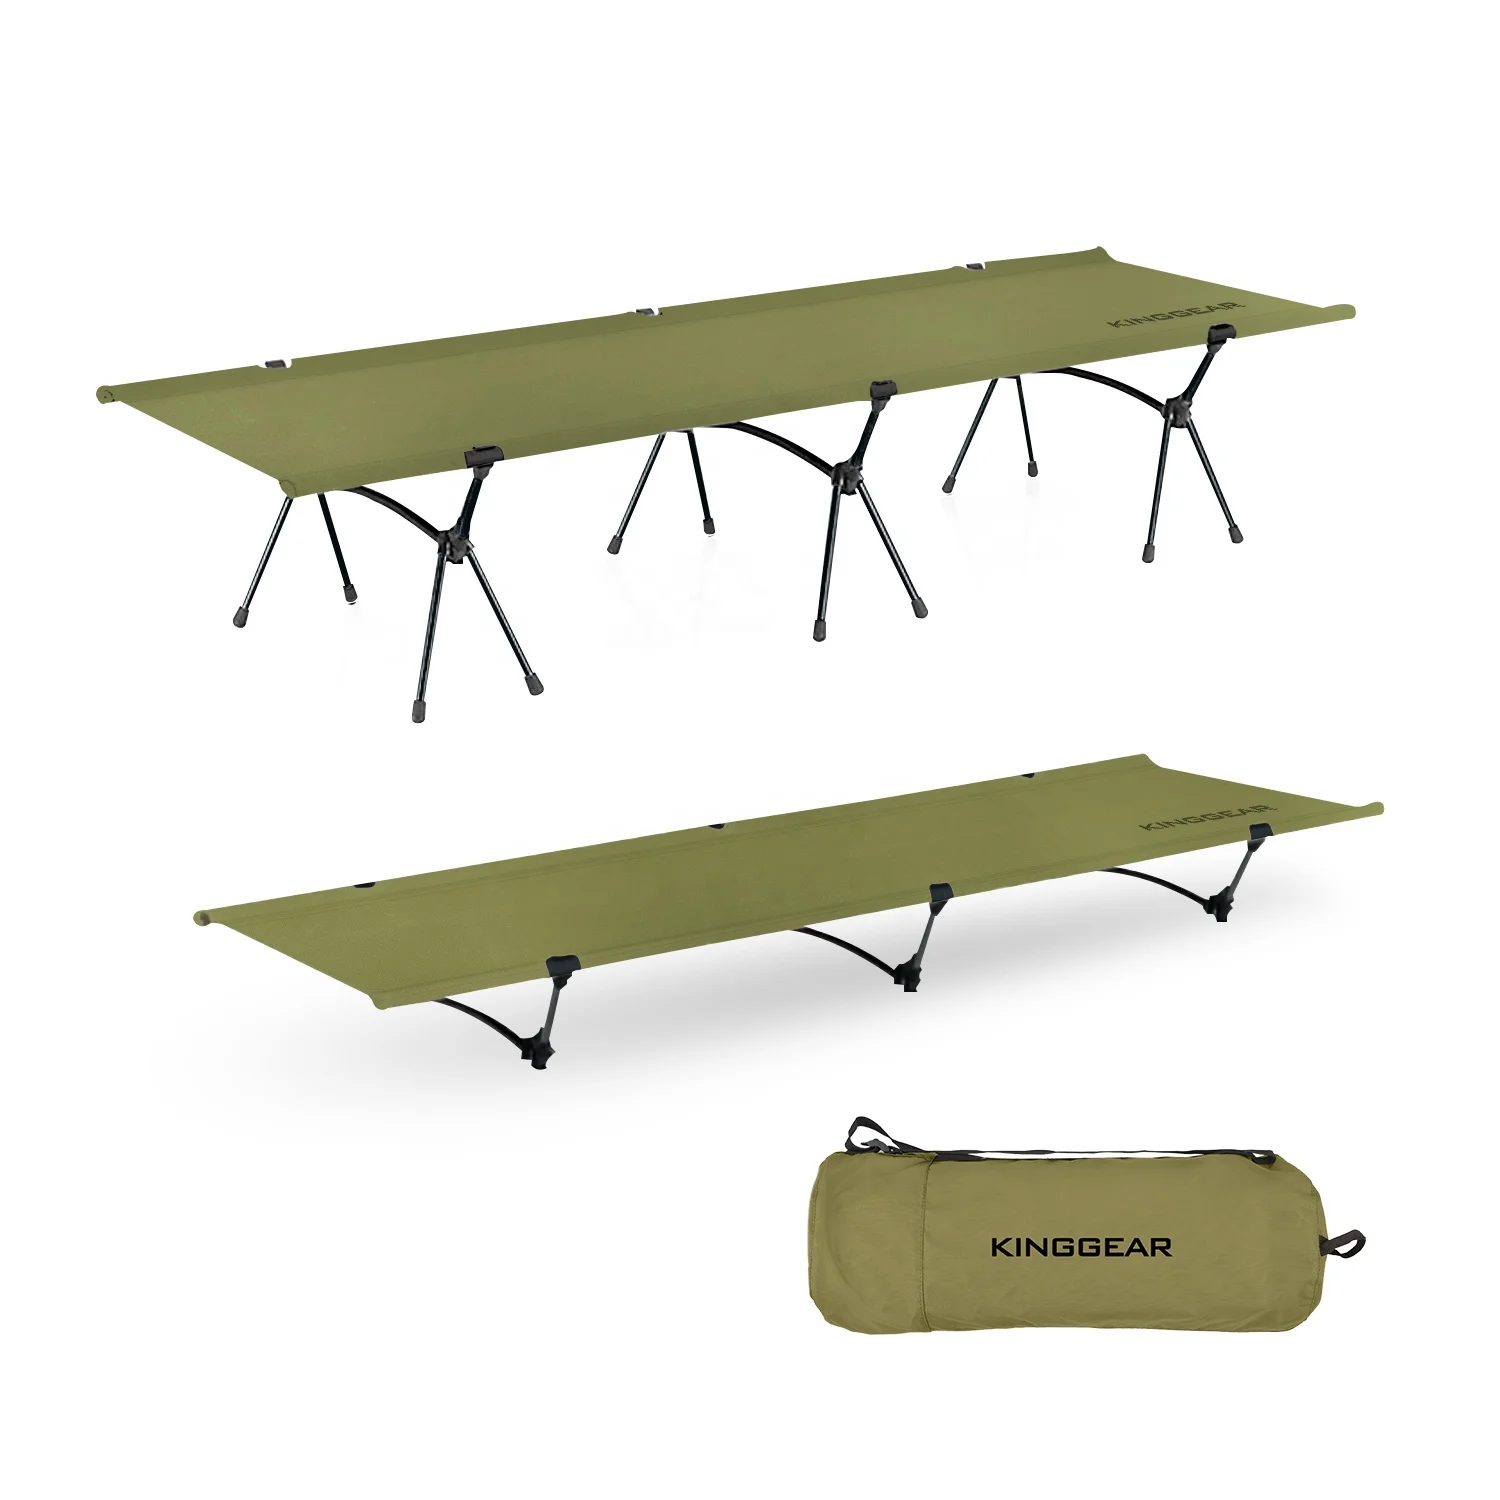 

KingGear Ultralight Compact Travel Aluminum folding Camp Bed Adjustable Height Sleeping Camp Cot Folding Camping Bed, Black;khaki;army green